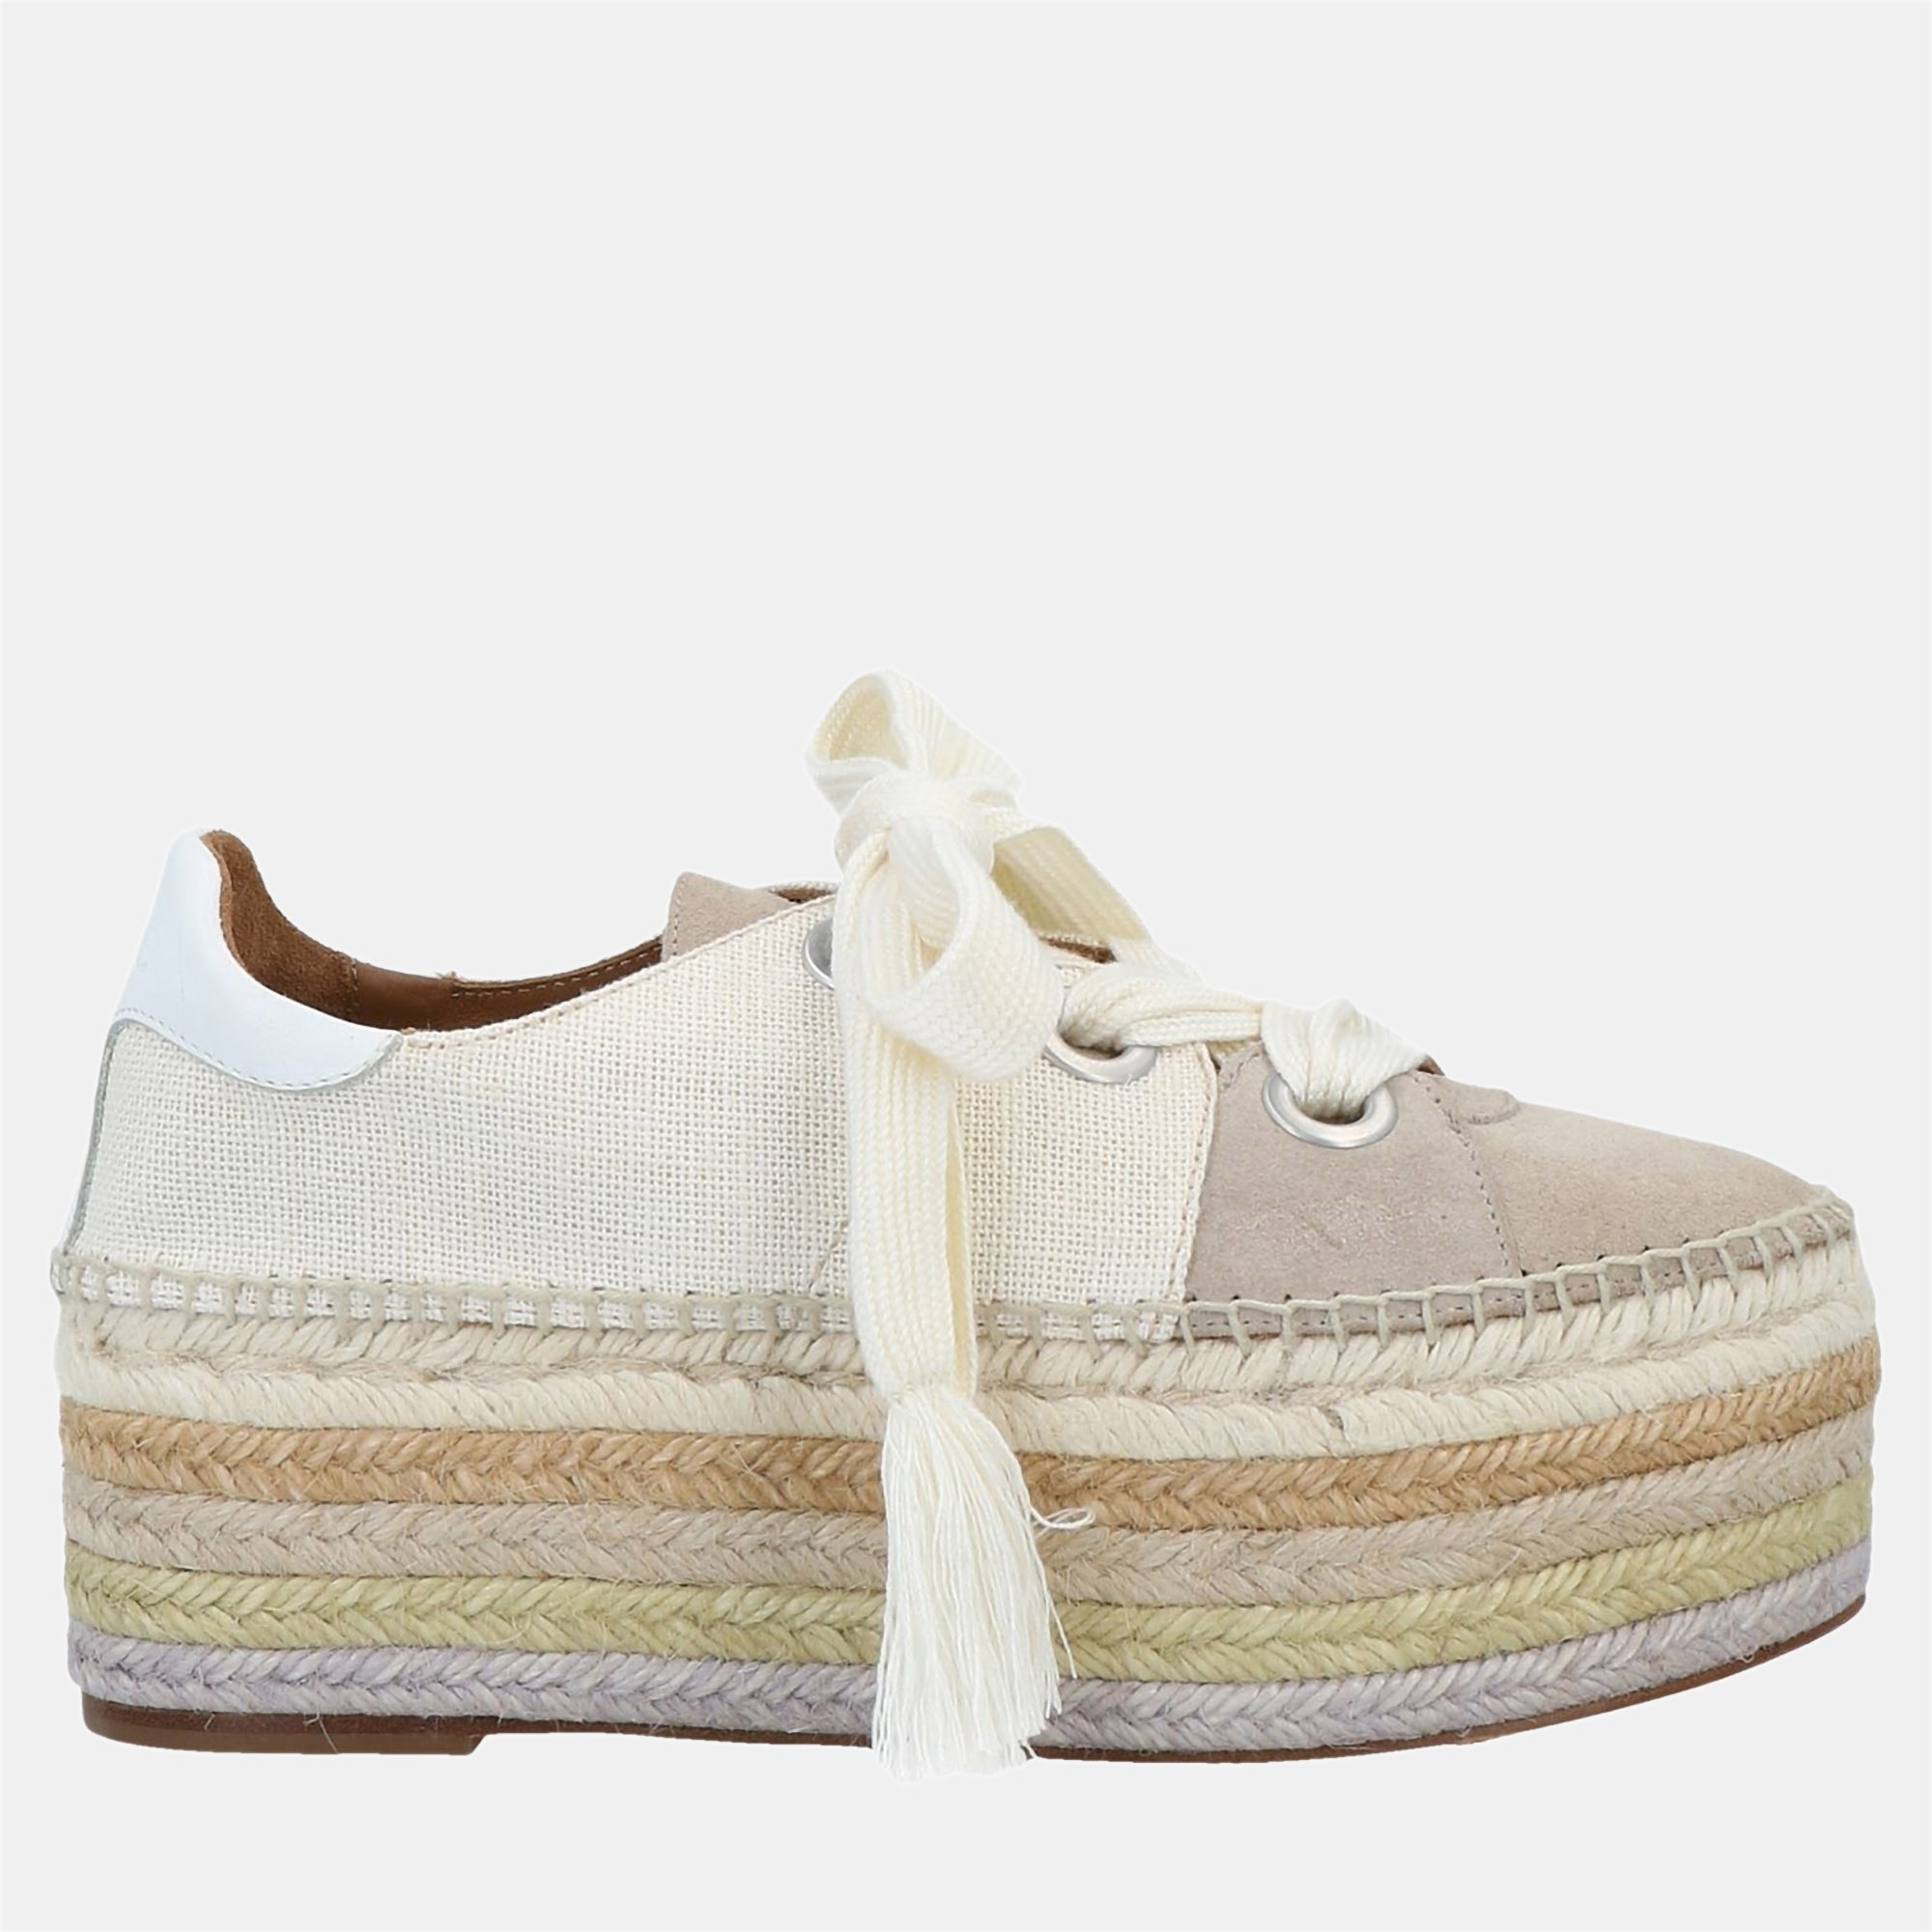 Chloe suede and canvas espadrille sneakers size 40